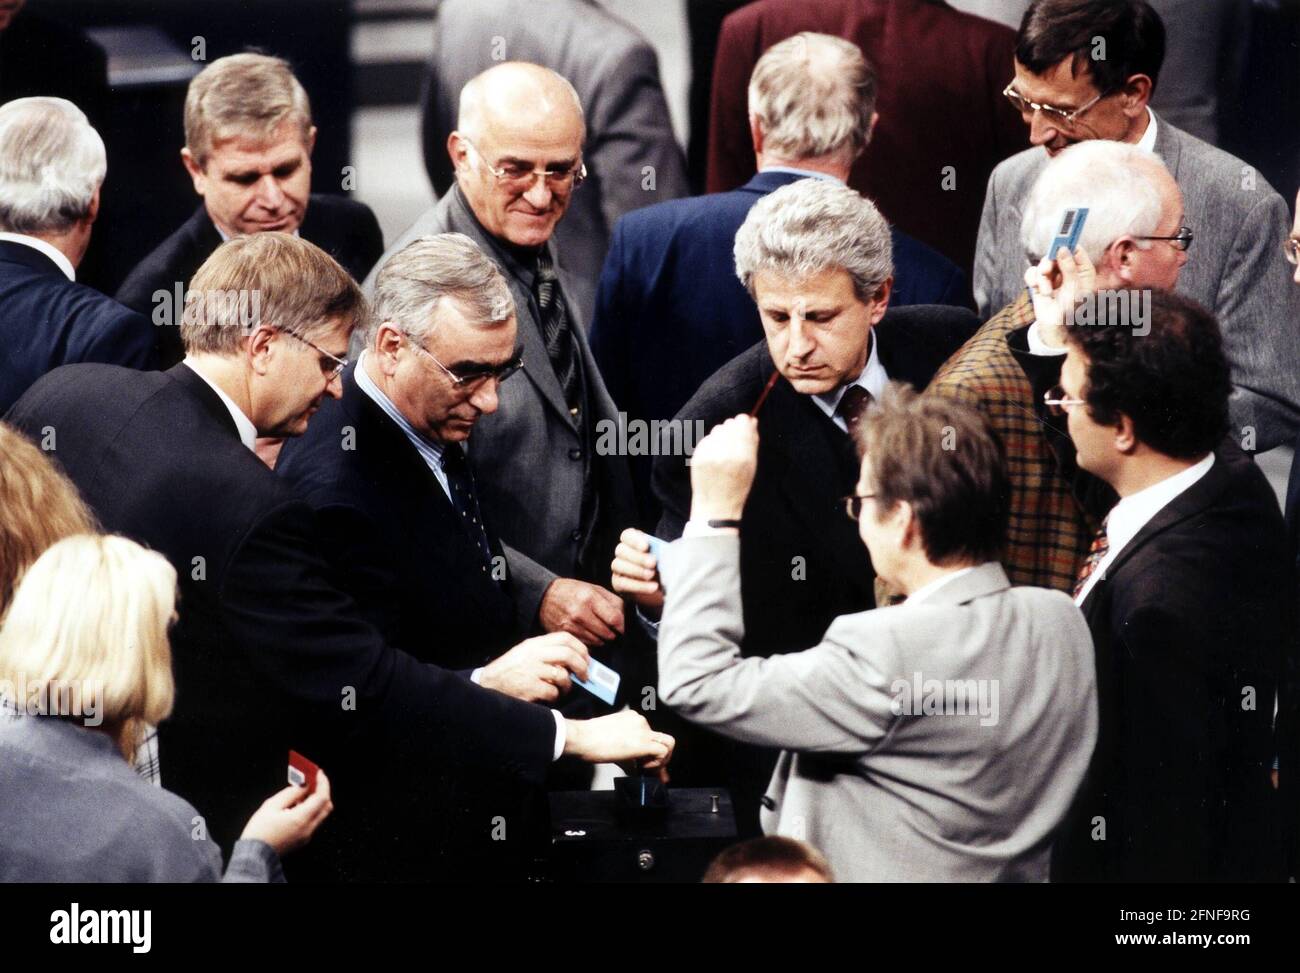 Recording date: 24.11.1999 Members of parliament cast their votes during a roll call vote in the Bundestag. Among them Peter Hinze and Theo Waigel. [automated translation] Stock Photo